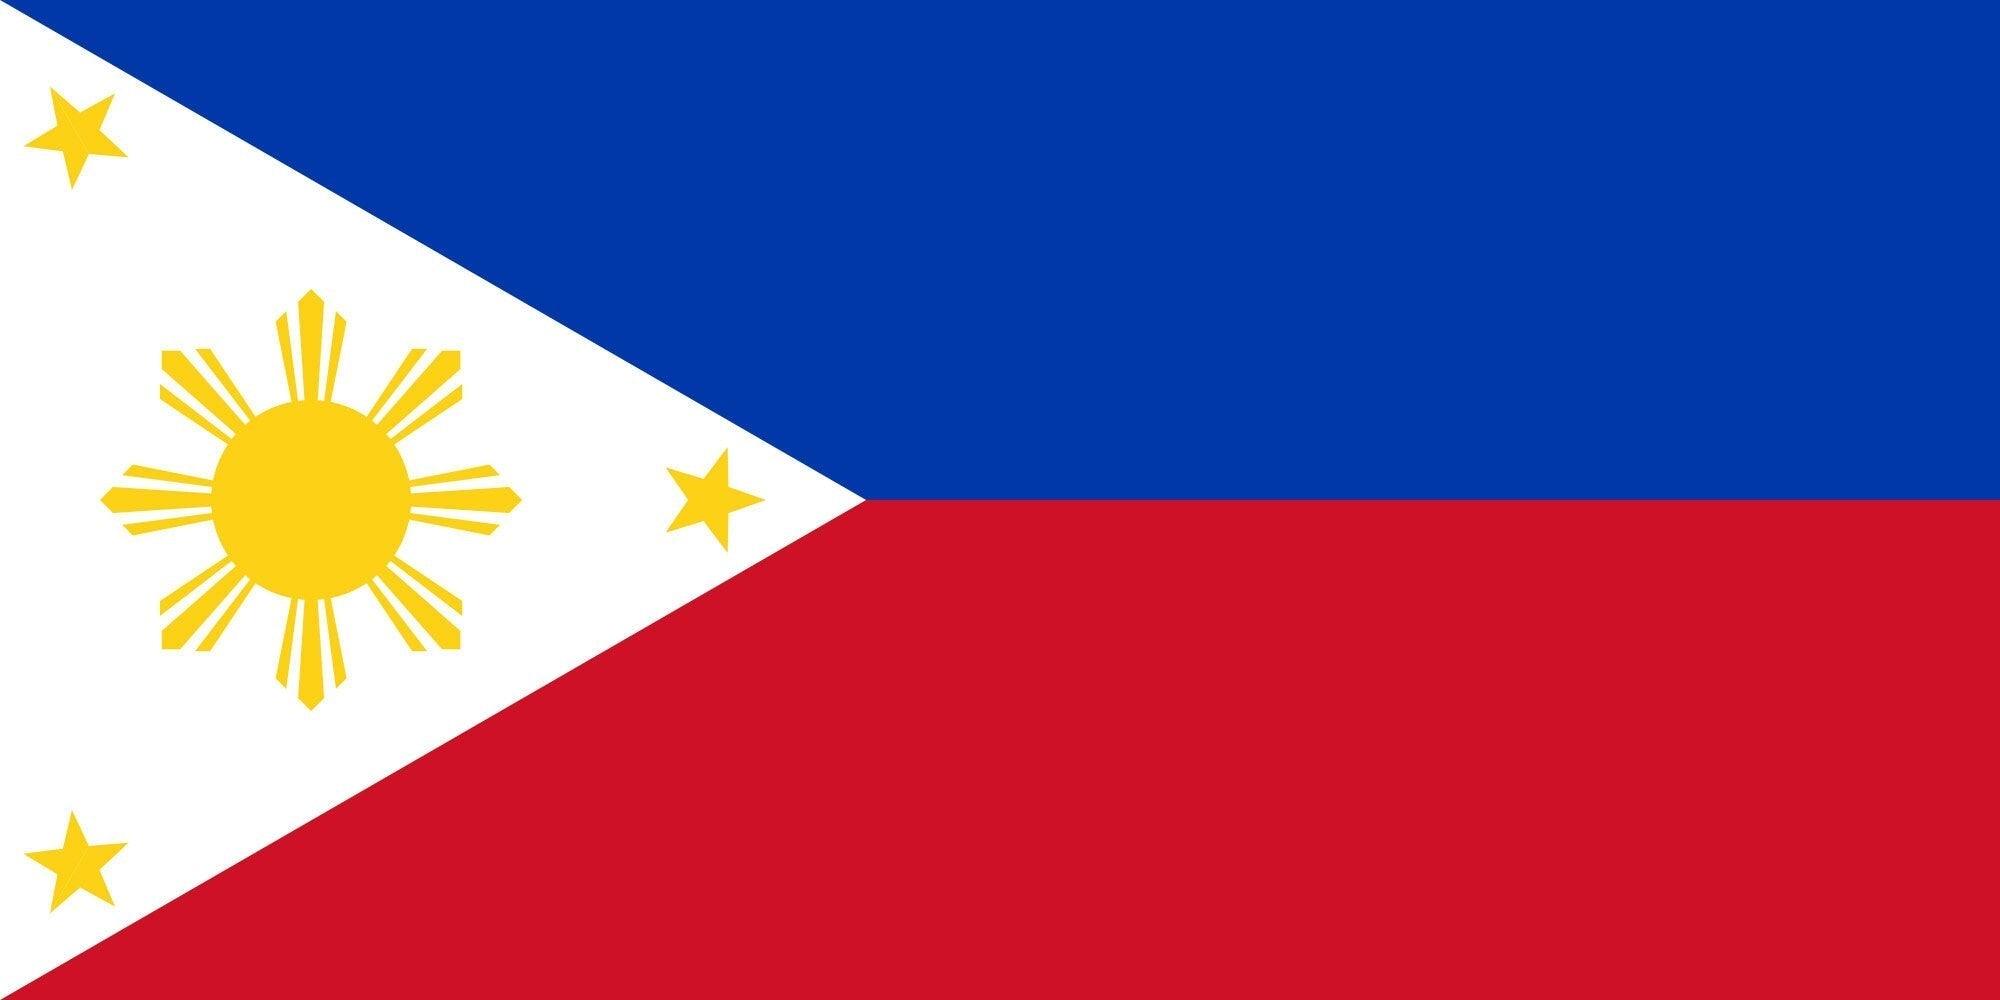 Filipino Flag Decal, wall Decal, Easily removed, Easily installed Filipino Flag sticker decal